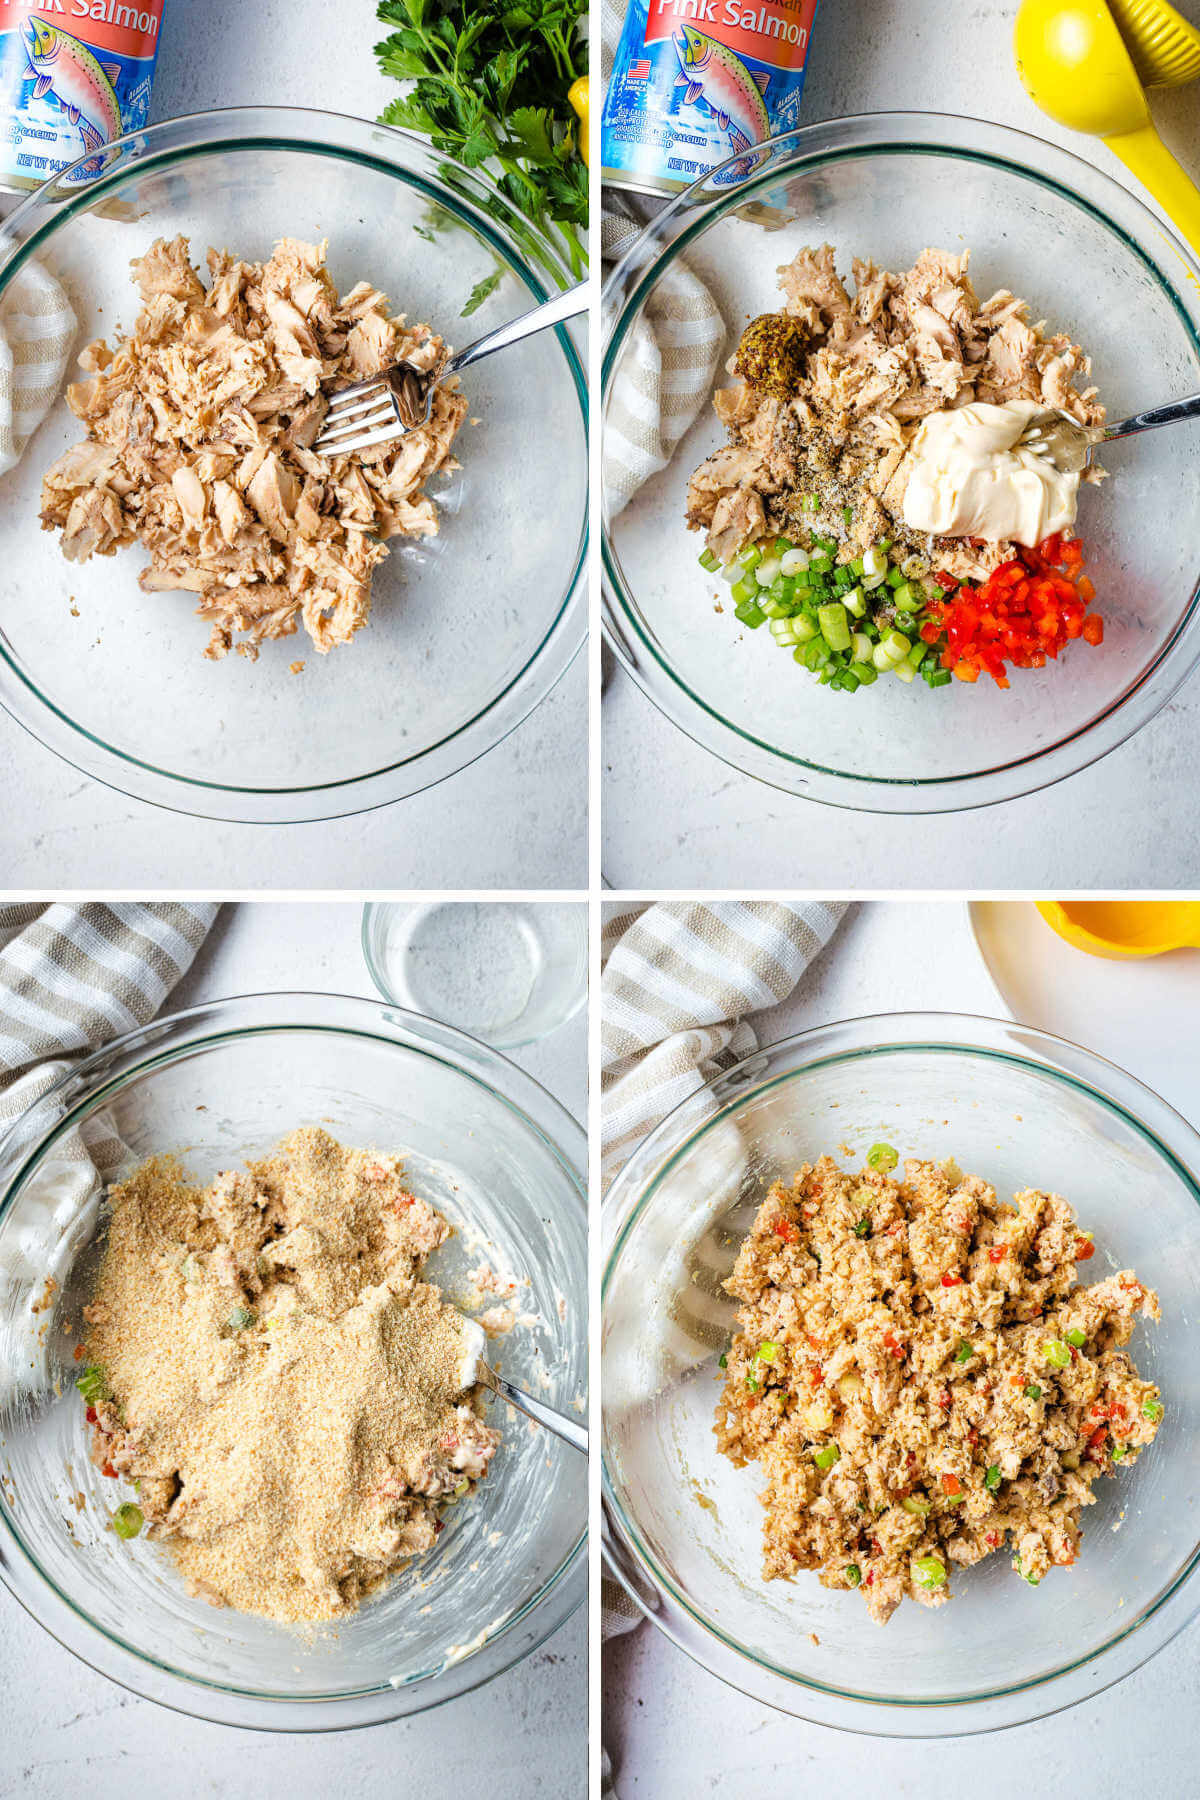 process steps for mixing together the ingredients for salmon croquettes in a glass bowl with mayonnaise, chopped onion, spices, bell pepper, and breadcrumbs.